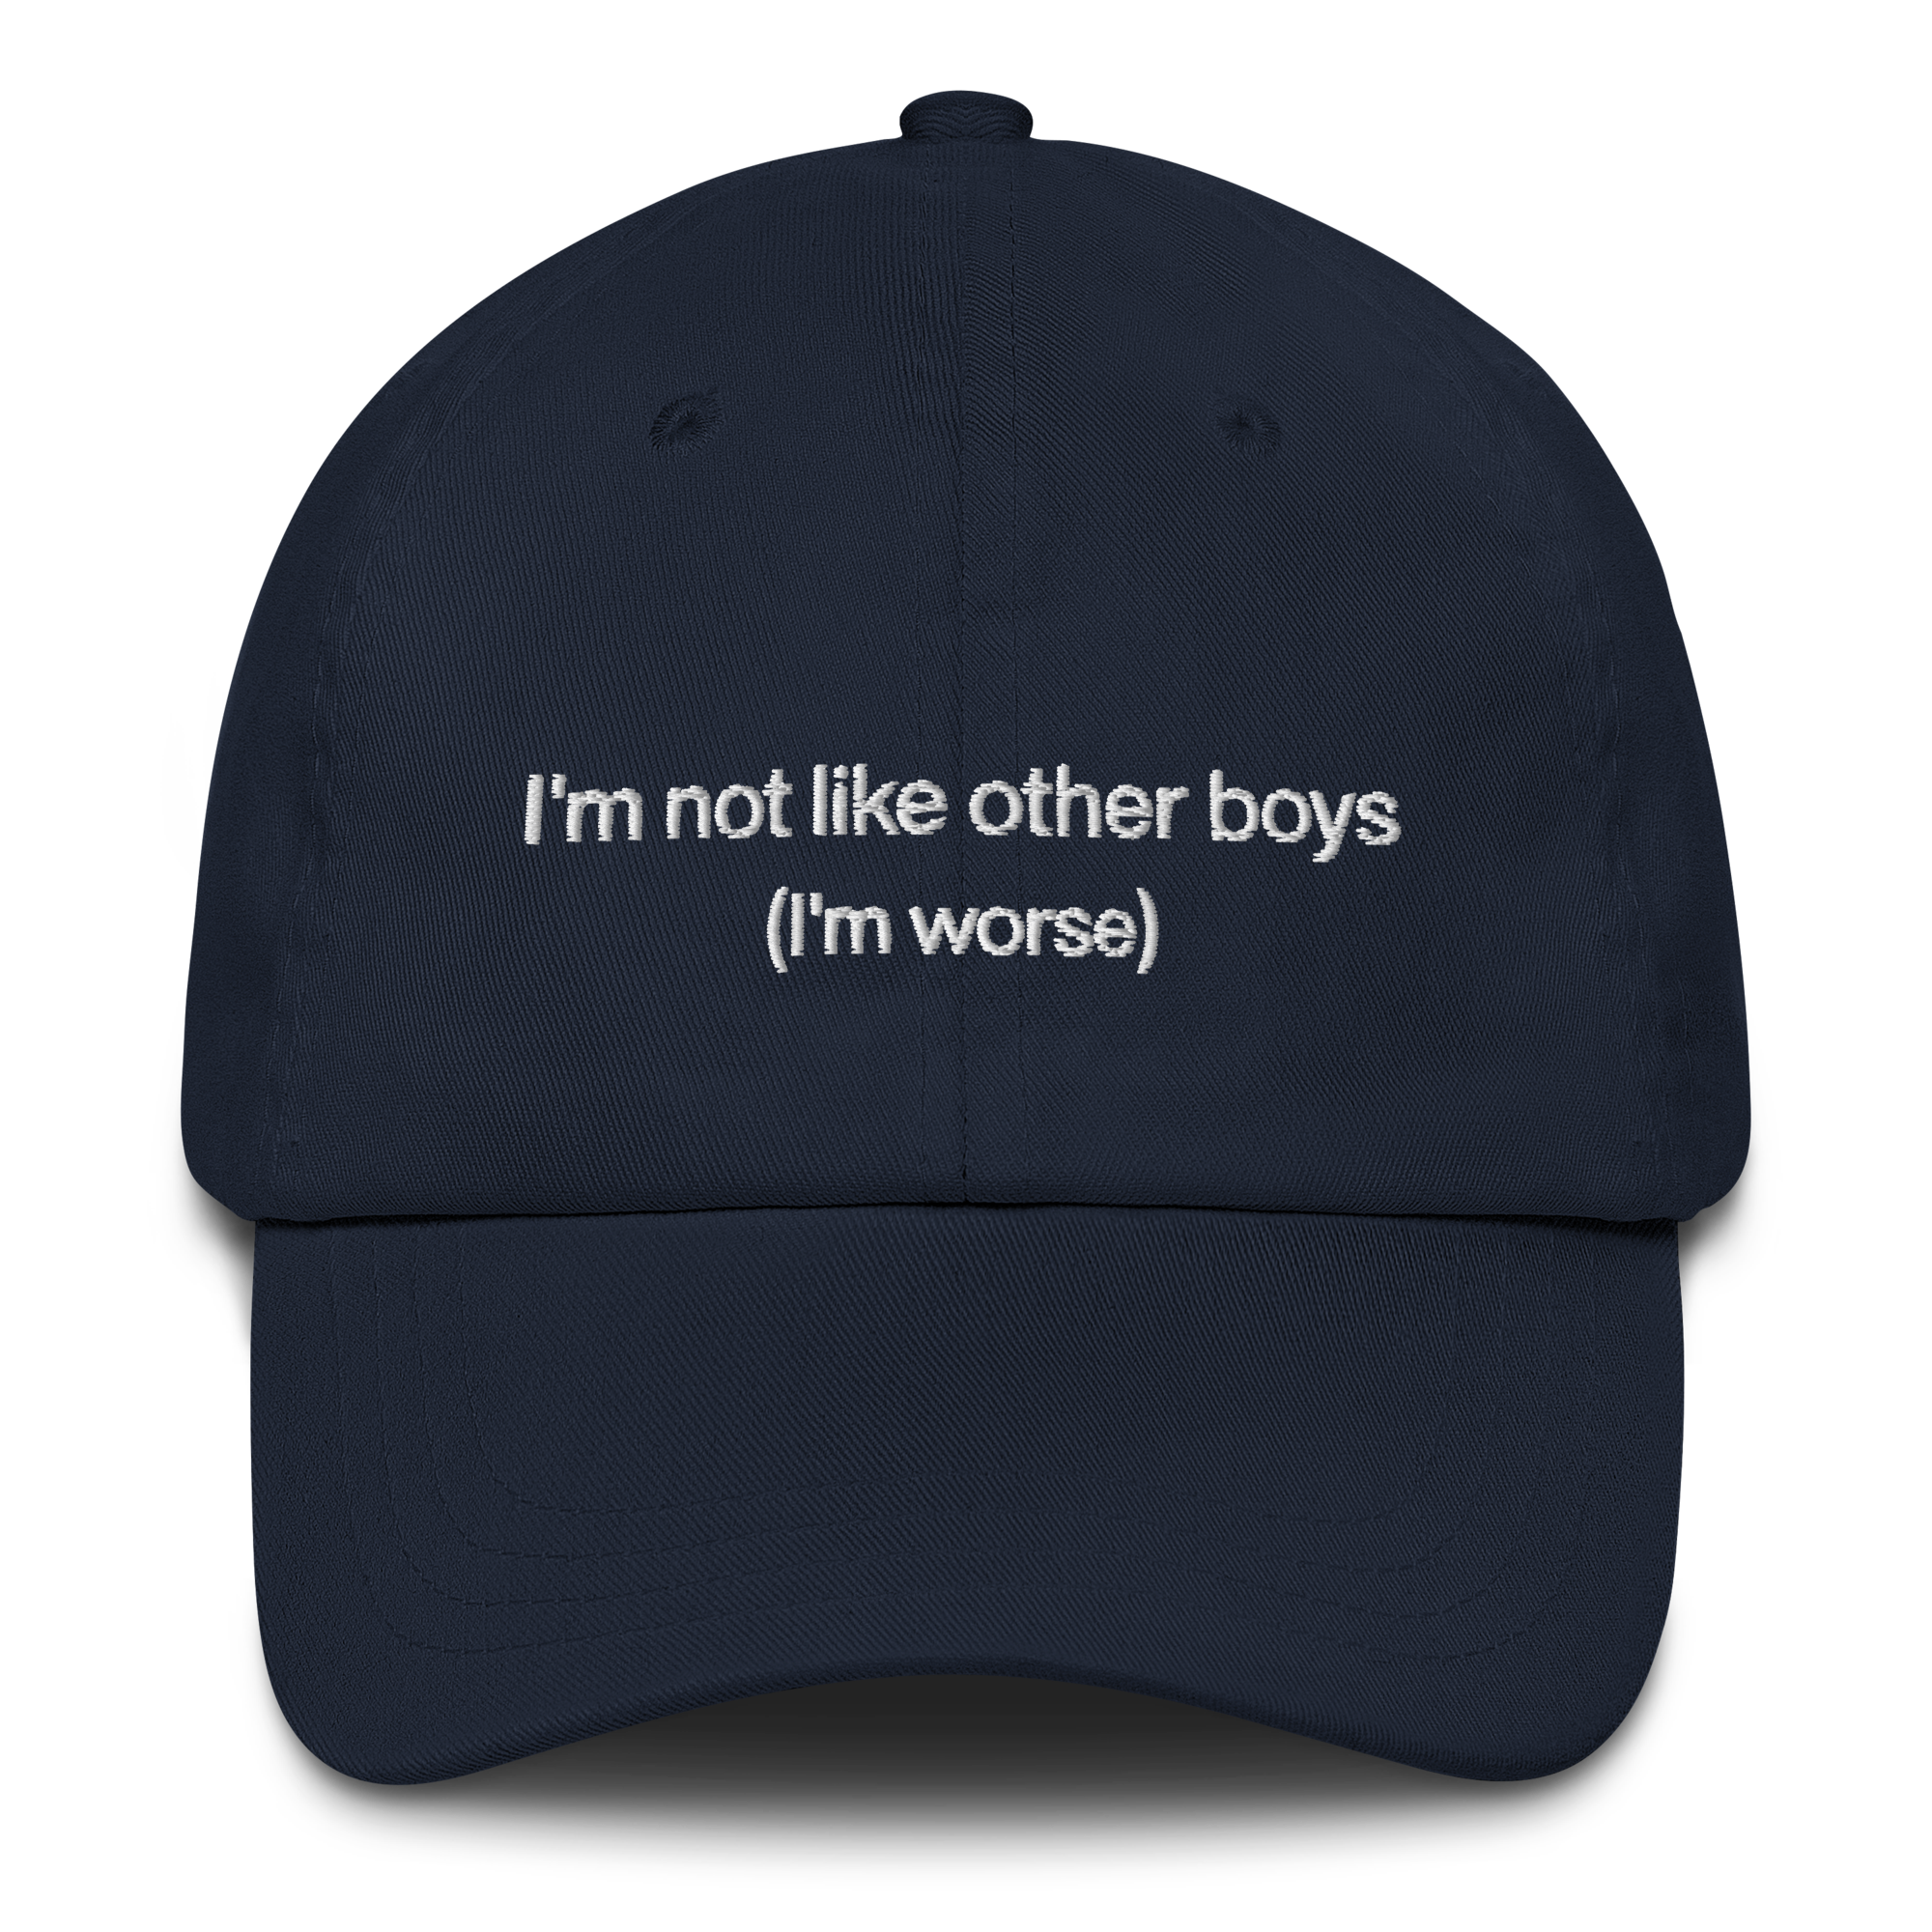 classic-dad-hat-navy-front-667b1f18b7454.png